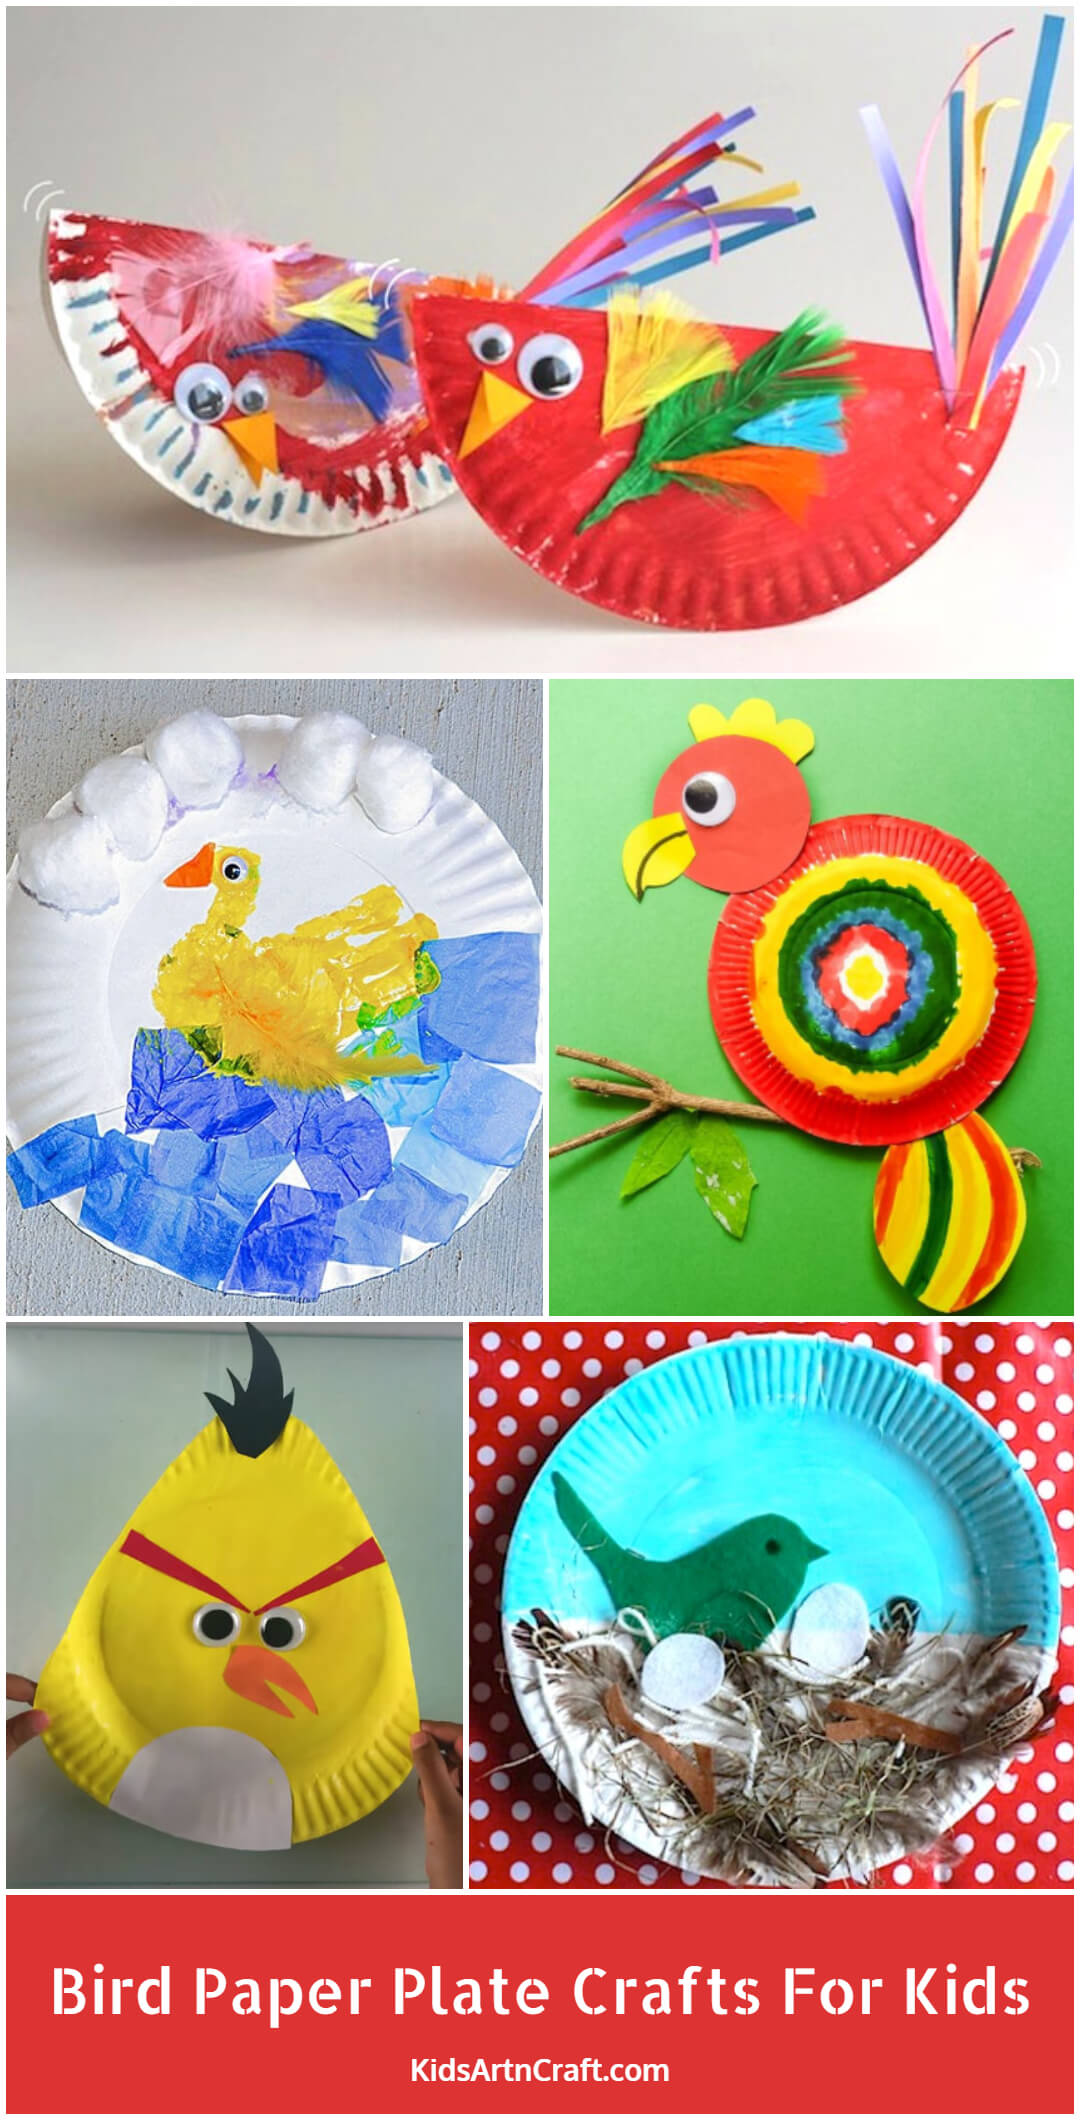 Bird Paper Plate Crafts For Kids